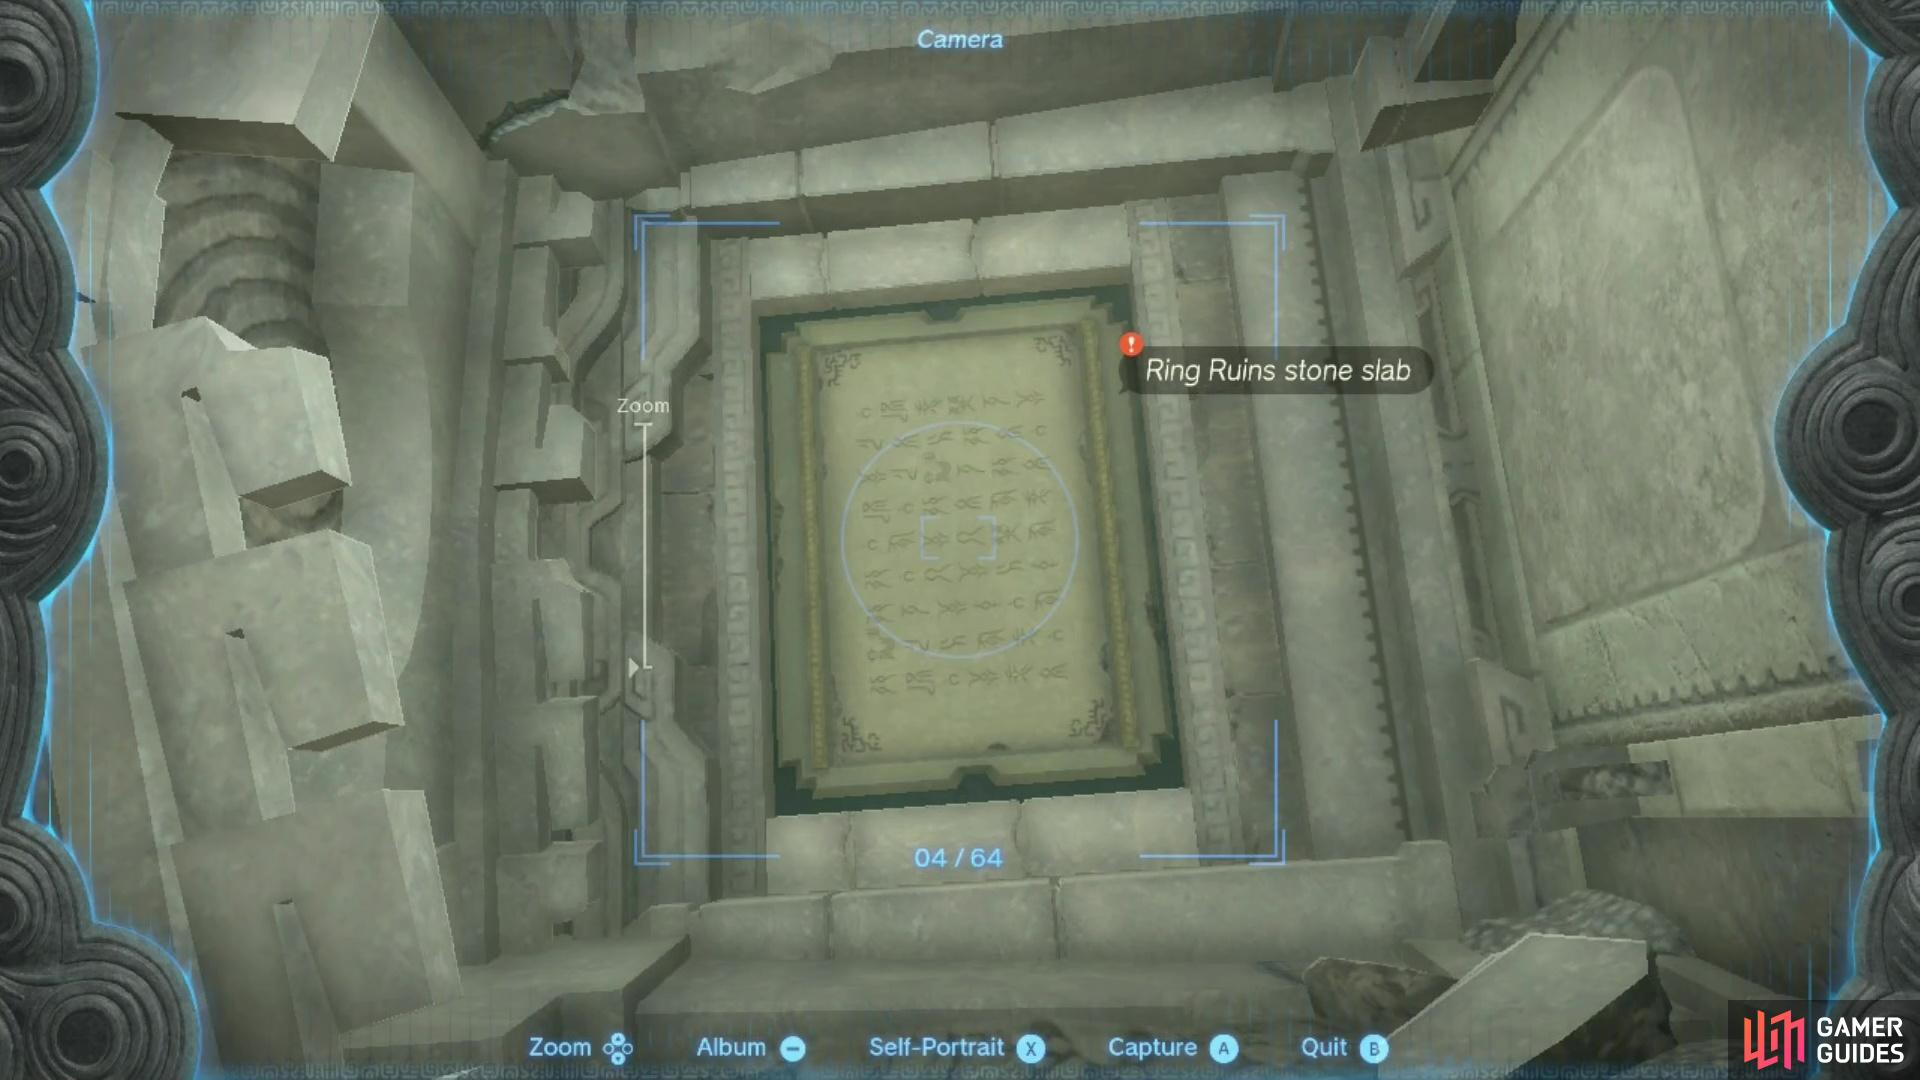 Ascend into the Ring Ruin and take a picture of the slab to show Tauro and Paya.  